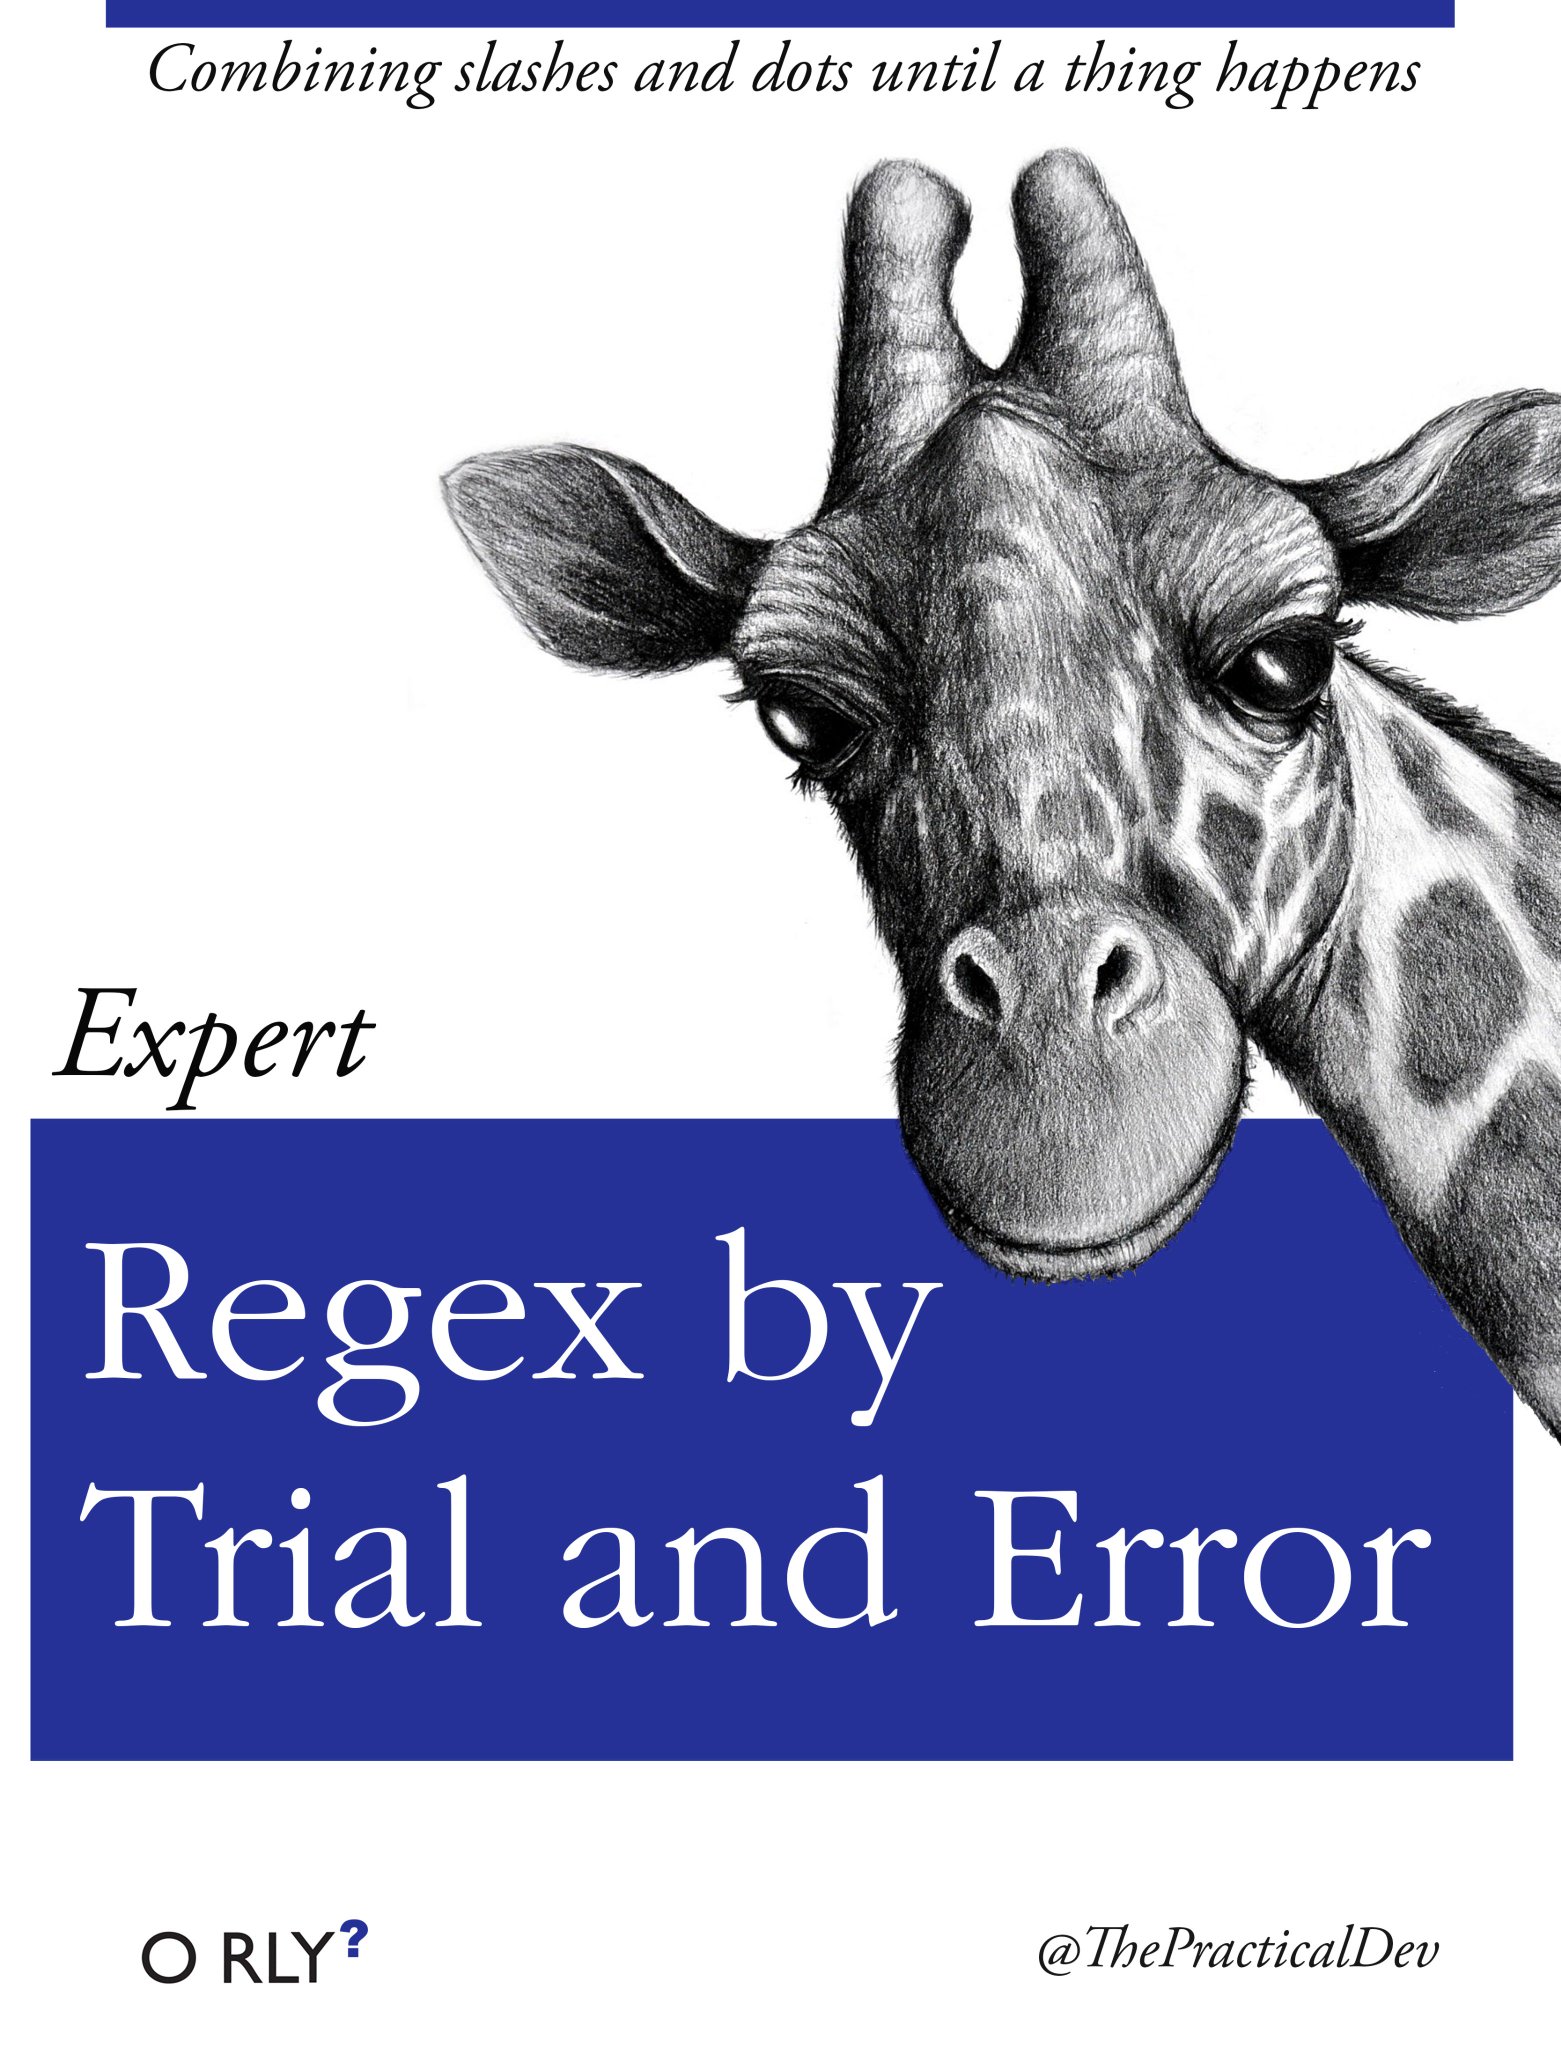 regex by trial and error